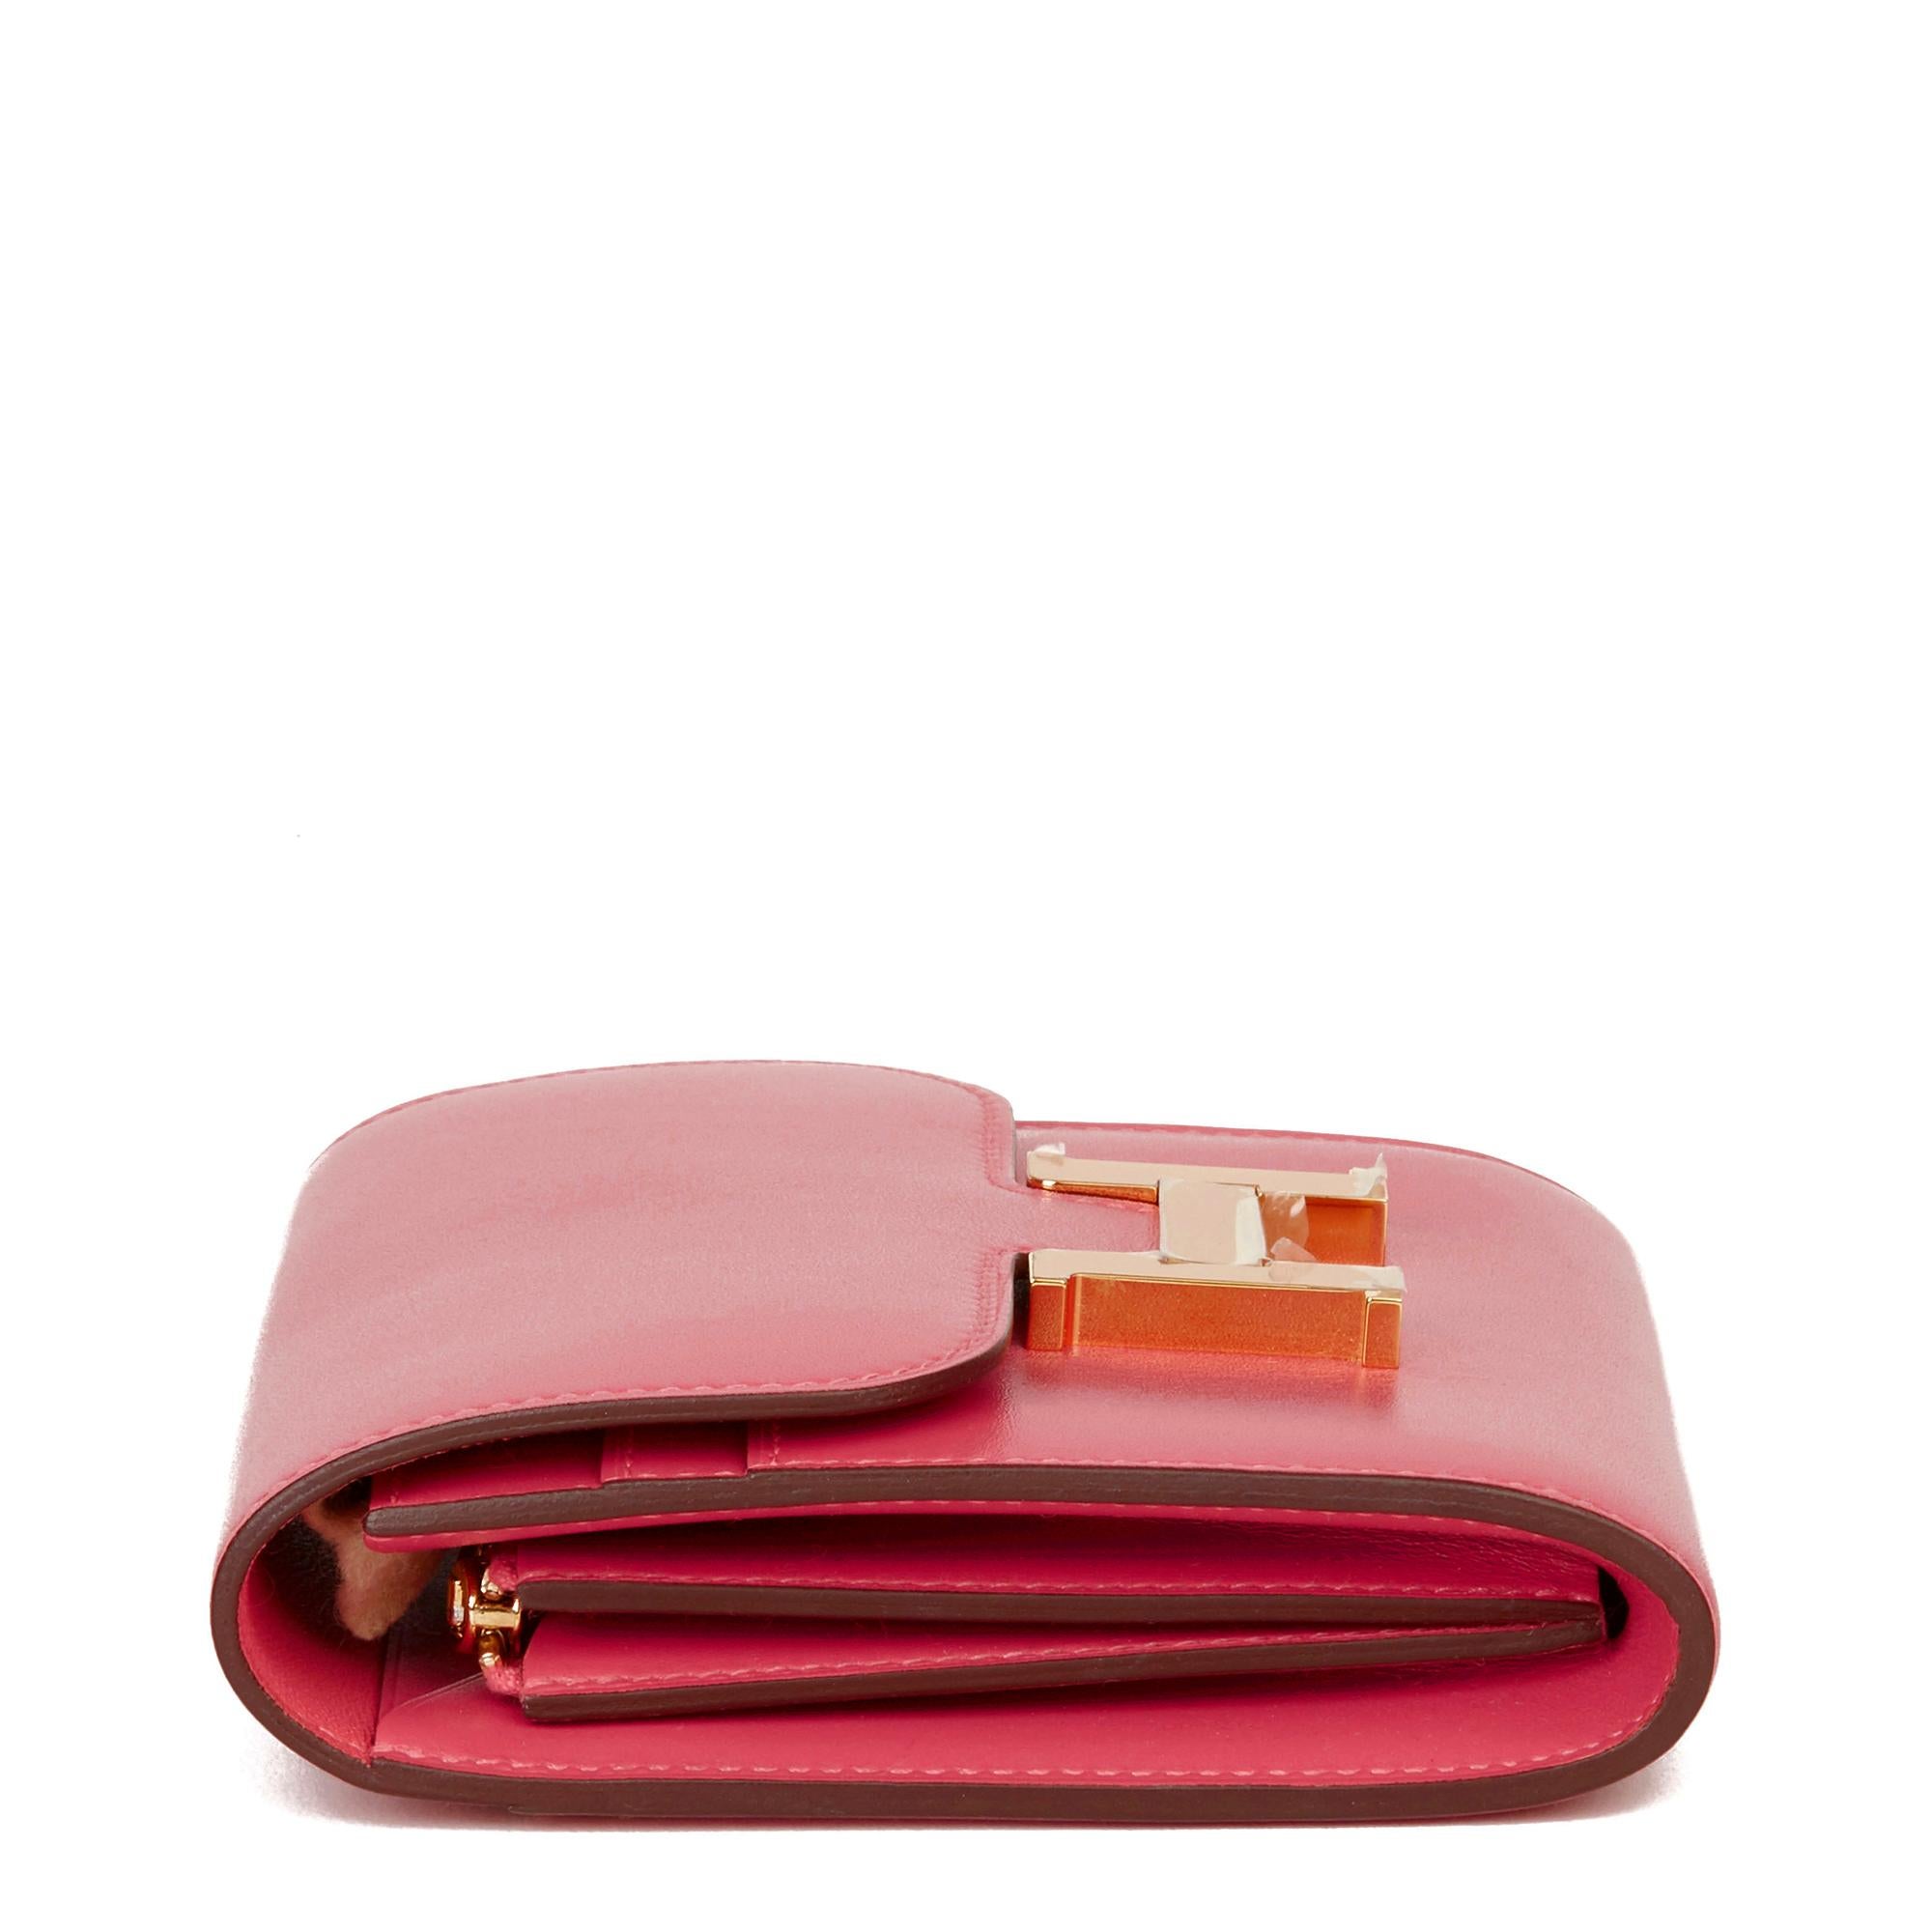 HERMÈS
Rose Lipstick Tadelakt Leather Constance Compact Wallet

Xupes Reference: HB2995
Serial Number: A
Age (Circa): 2017
Accompanied By: Hermès Dust Bag, Box, Protective Felt
Authenticity Details: Date Stamp (Made in France)
Gender: Ladies
Type: